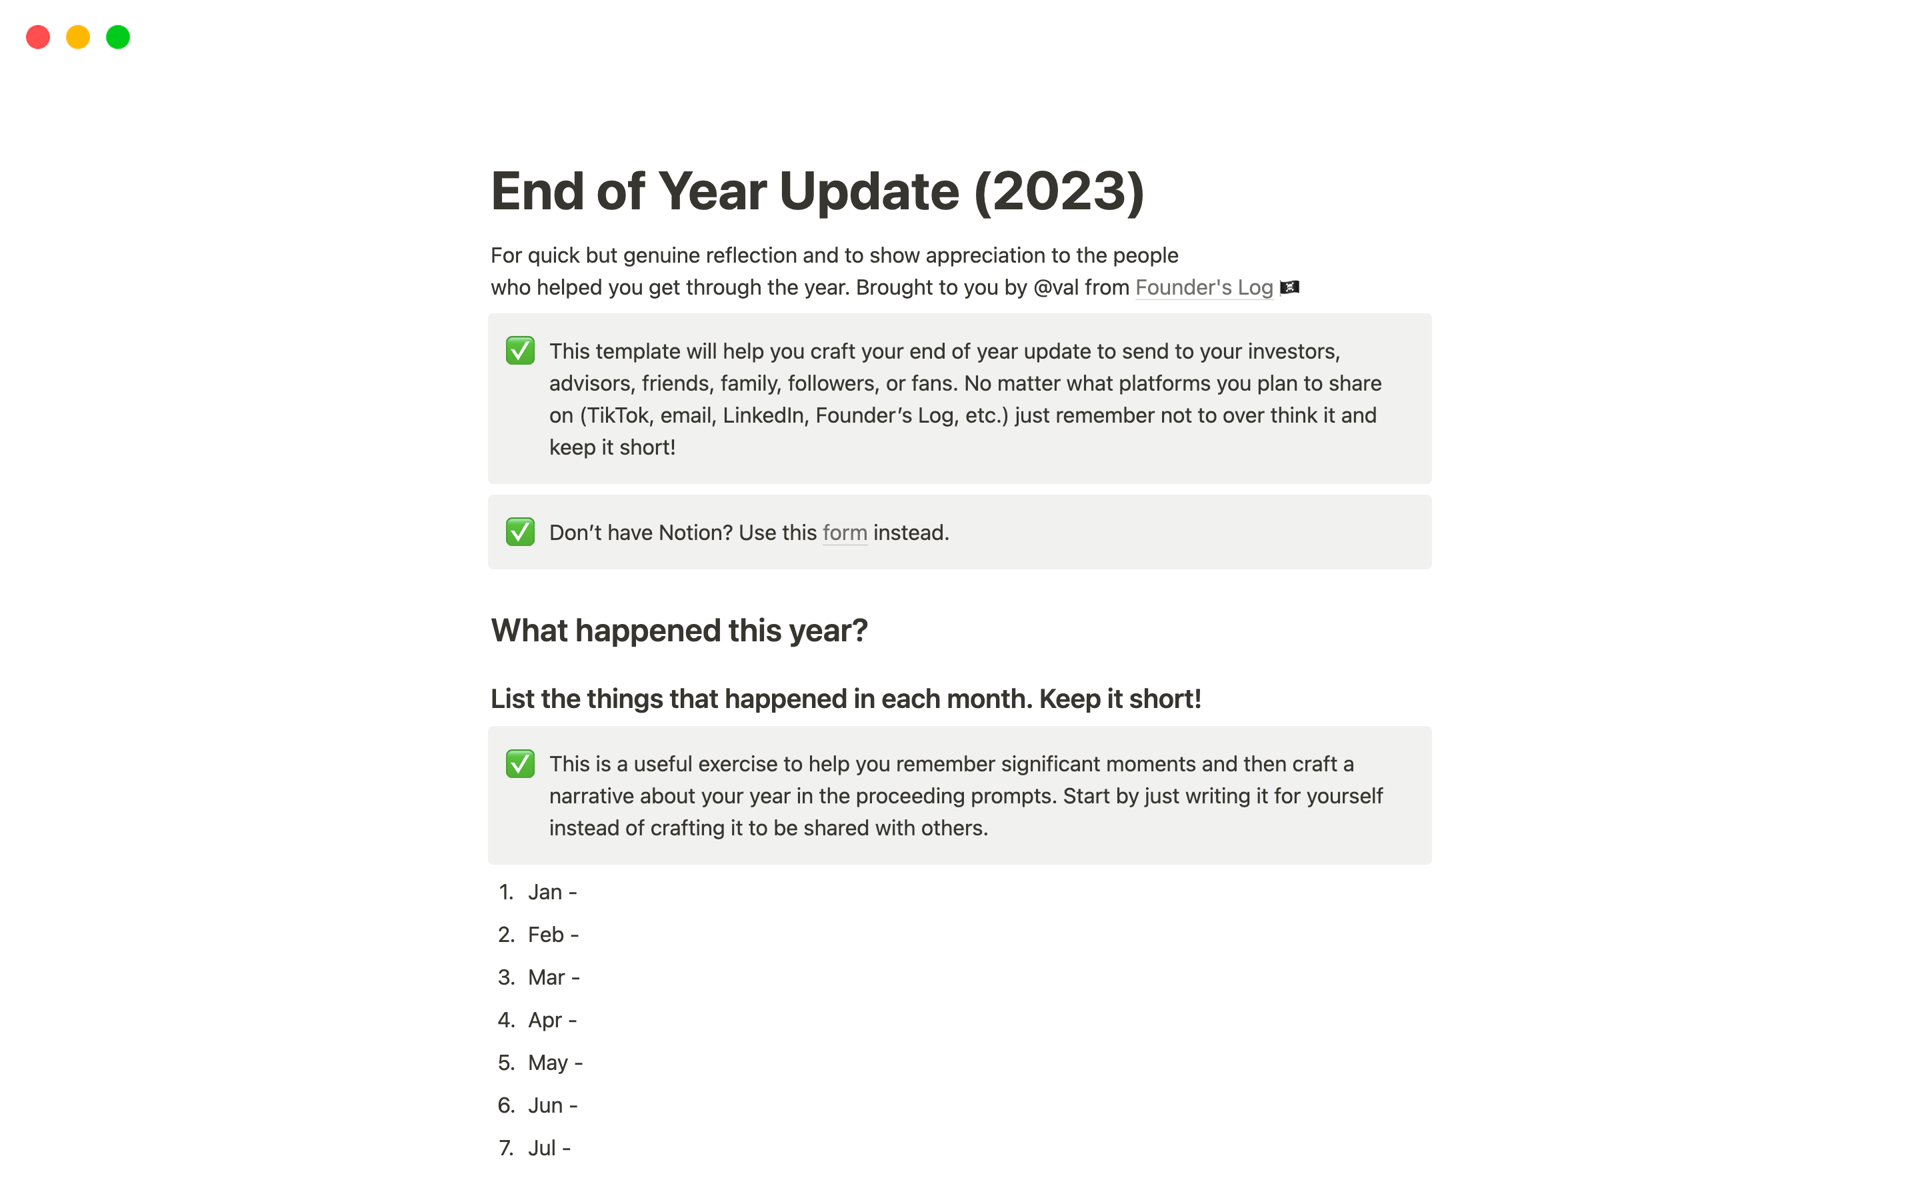 This template will help you craft your end of year update to send to your investors, advisors, friends, family, followers, or fans.